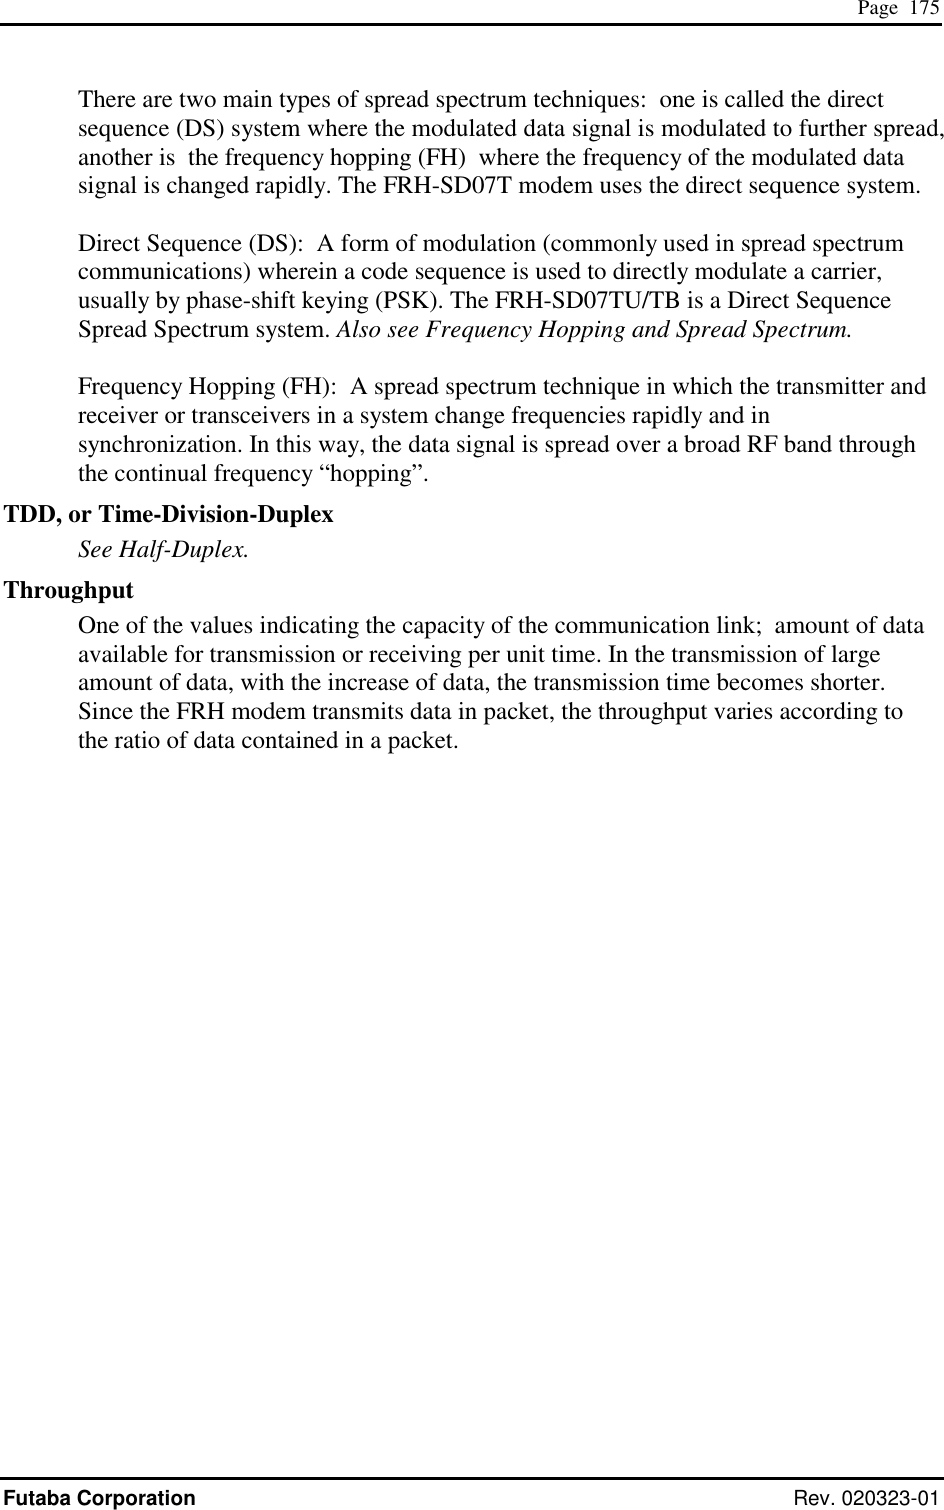  Page  175 Futaba Corporation Rev. 020323-01 There are two main types of spread spectrum techniques:  one is called the direct sequence (DS) system where the modulated data signal is modulated to further spread, another is  the frequency hopping (FH)  where the frequency of the modulated data signal is changed rapidly. The FRH-SD07T modem uses the direct sequence system.   Direct Sequence (DS):  A form of modulation (commonly used in spread spectrum communications) wherein a code sequence is used to directly modulate a carrier, usually by phase-shift keying (PSK). The FRH-SD07TU/TB is a Direct Sequence Spread Spectrum system. Also see Frequency Hopping and Spread Spectrum.  Frequency Hopping (FH):  A spread spectrum technique in which the transmitter and receiver or transceivers in a system change frequencies rapidly and in synchronization. In this way, the data signal is spread over a broad RF band through the continual frequency “hopping”. TDD, or Time-Division-Duplex See Half-Duplex. Throughput One of the values indicating the capacity of the communication link;  amount of data available for transmission or receiving per unit time. In the transmission of large amount of data, with the increase of data, the transmission time becomes shorter. Since the FRH modem transmits data in packet, the throughput varies according to the ratio of data contained in a packet.  